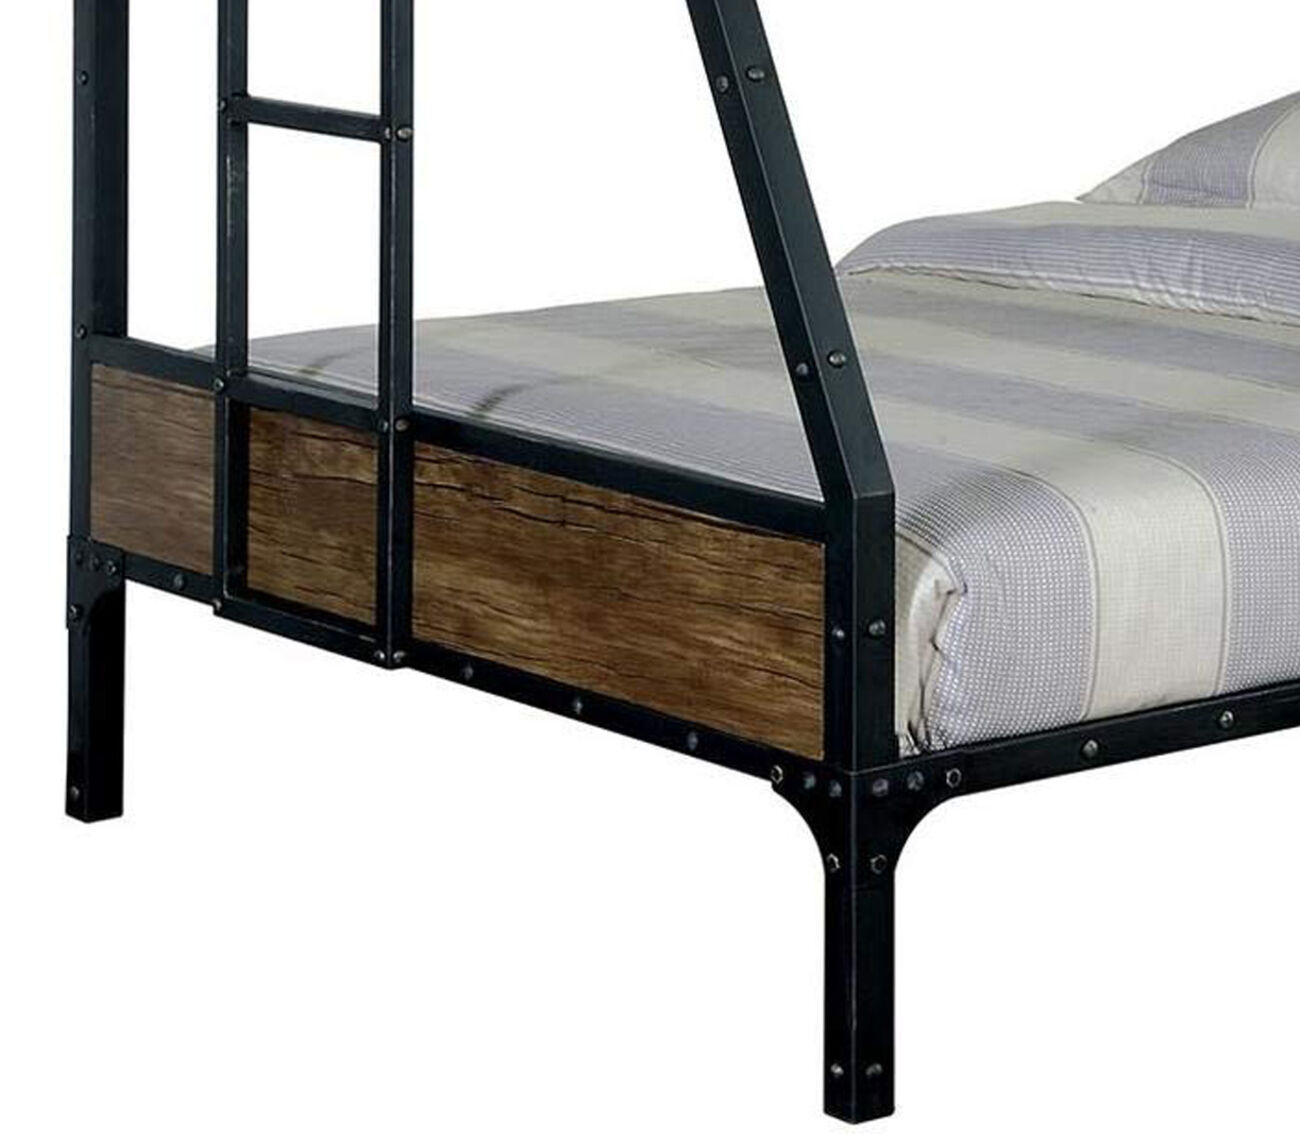 Wooden & Metal Frame Twin/Full Size Bunk Bed, Black